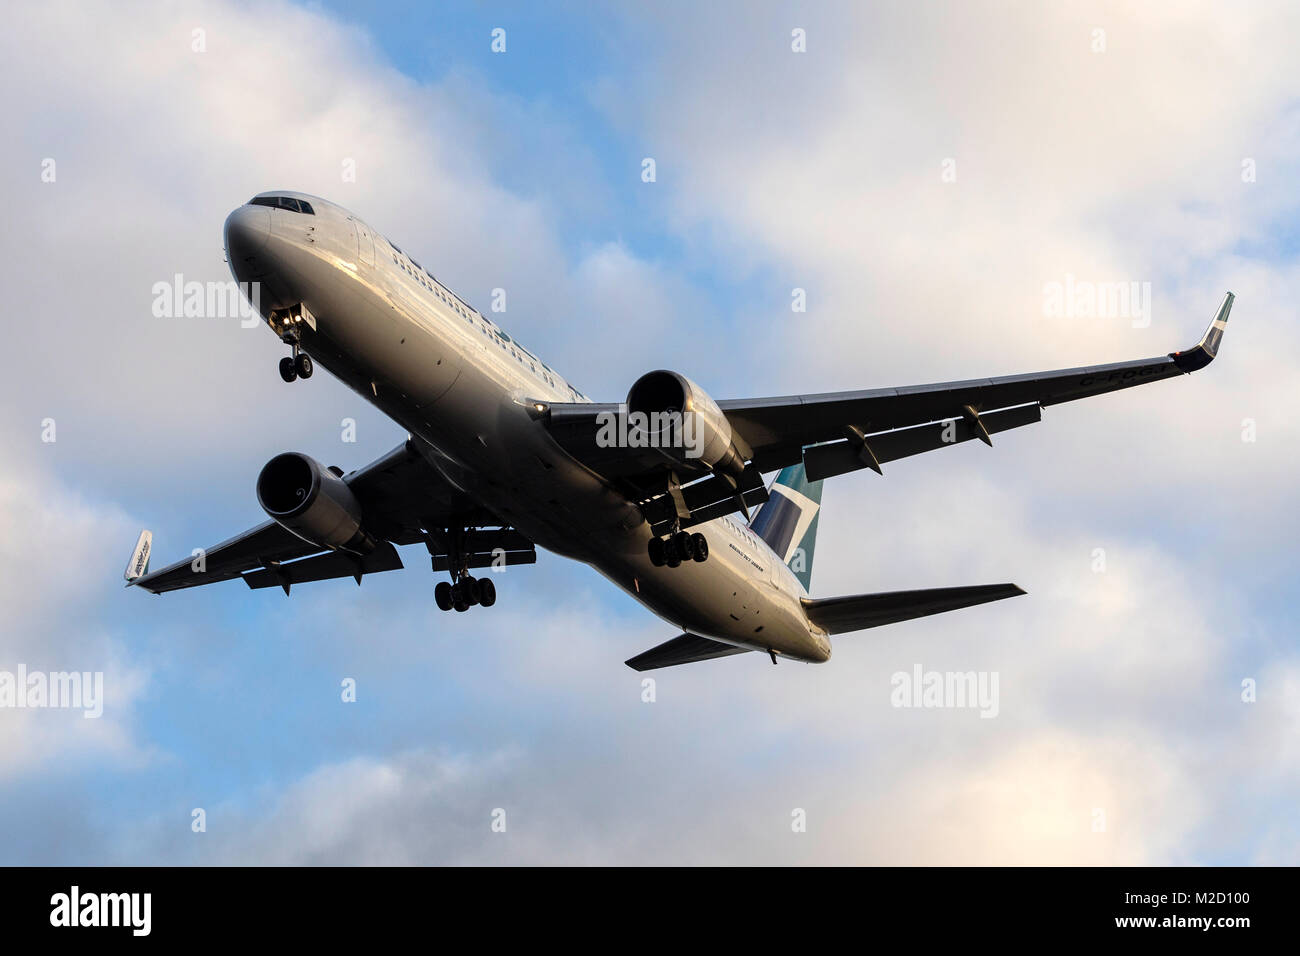 A WestJet Airlines Boeing 767-300ER aircraft on final approach to London Gatwick airport on a January morning Stock Photo